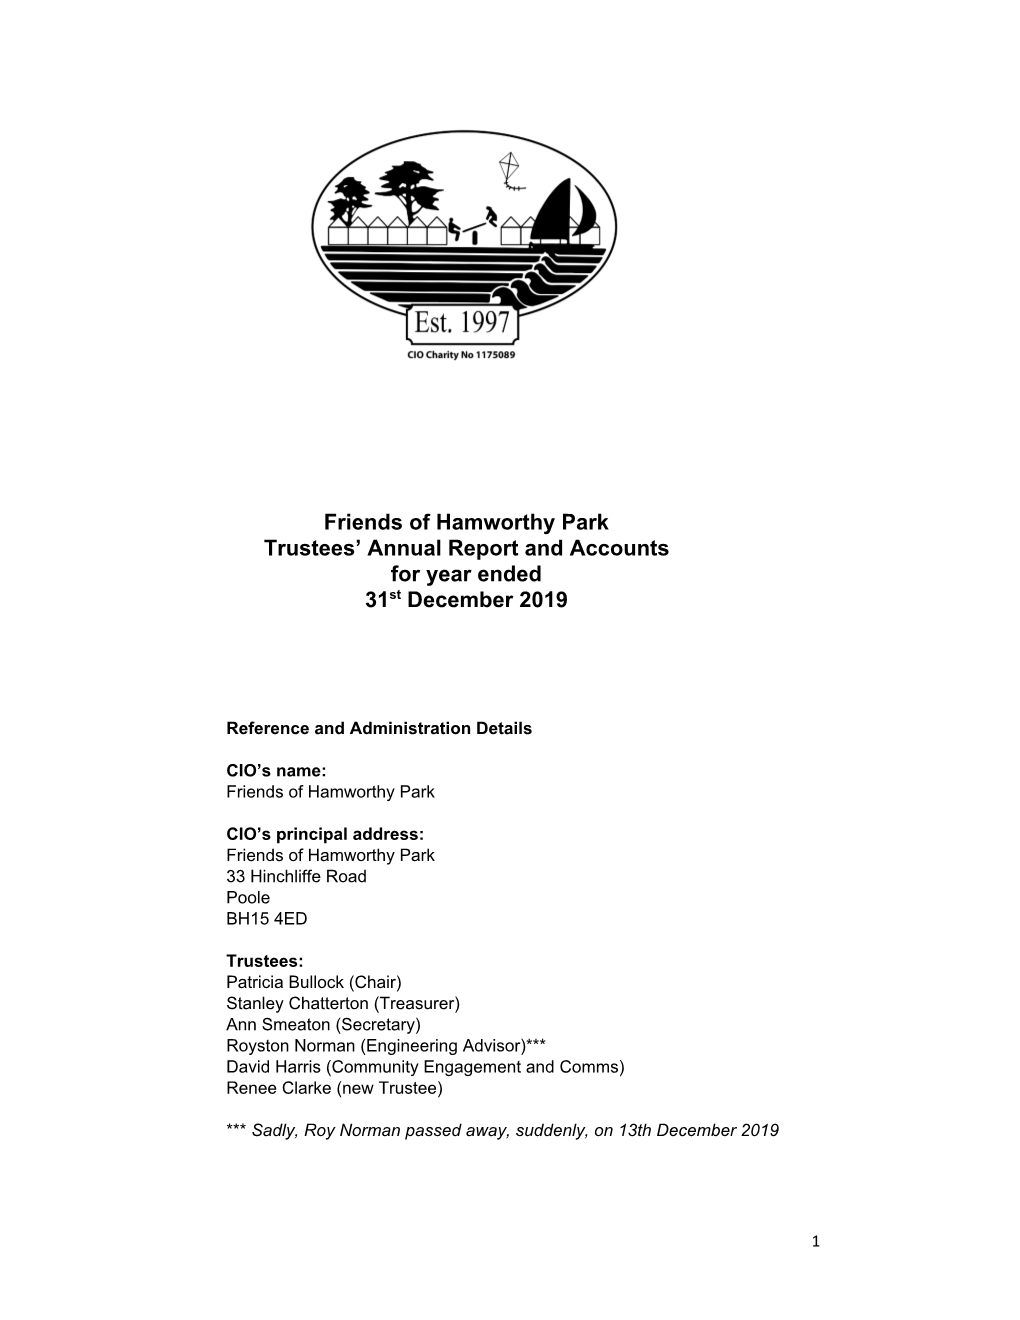 Friends of Hamworthy Park Trustees' Annual Report and Accounts For